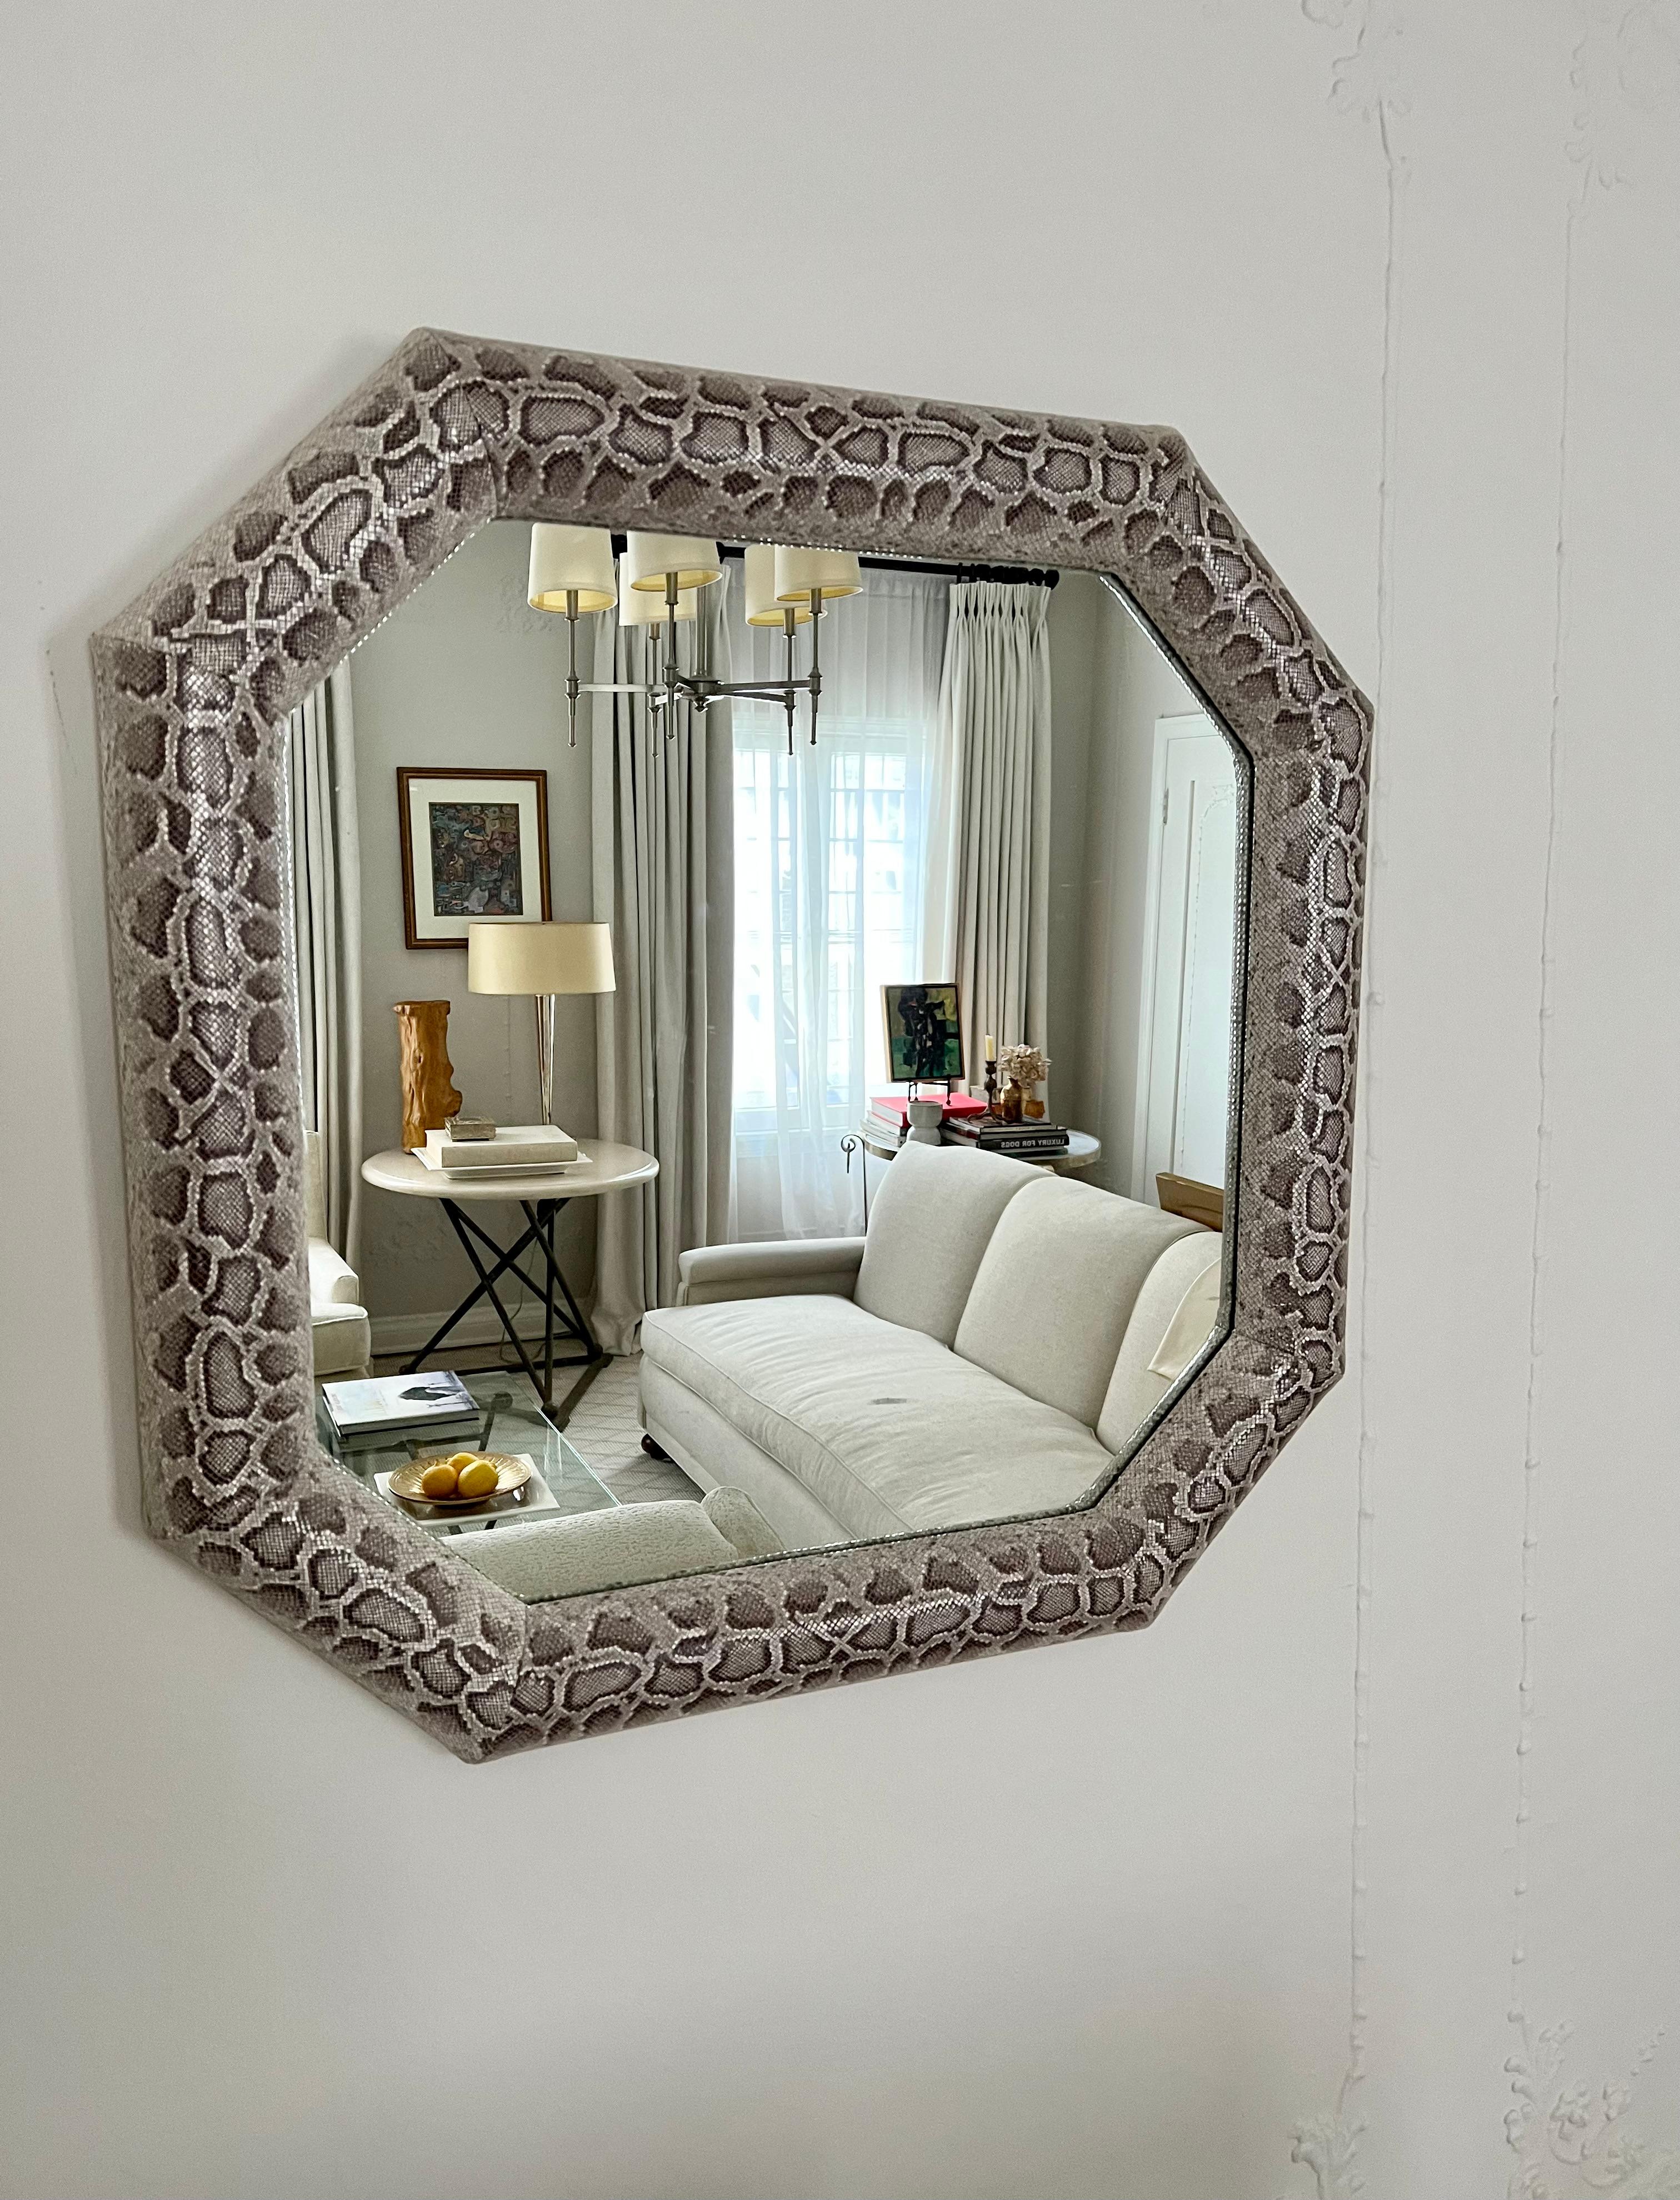 Python upholstery covers this wall mirror. A lovely piece representing the period with a wonderful and dynamic snake upholstery. The piece has been completely restored and has a great feeling in person. the leather has the same feel and energy of